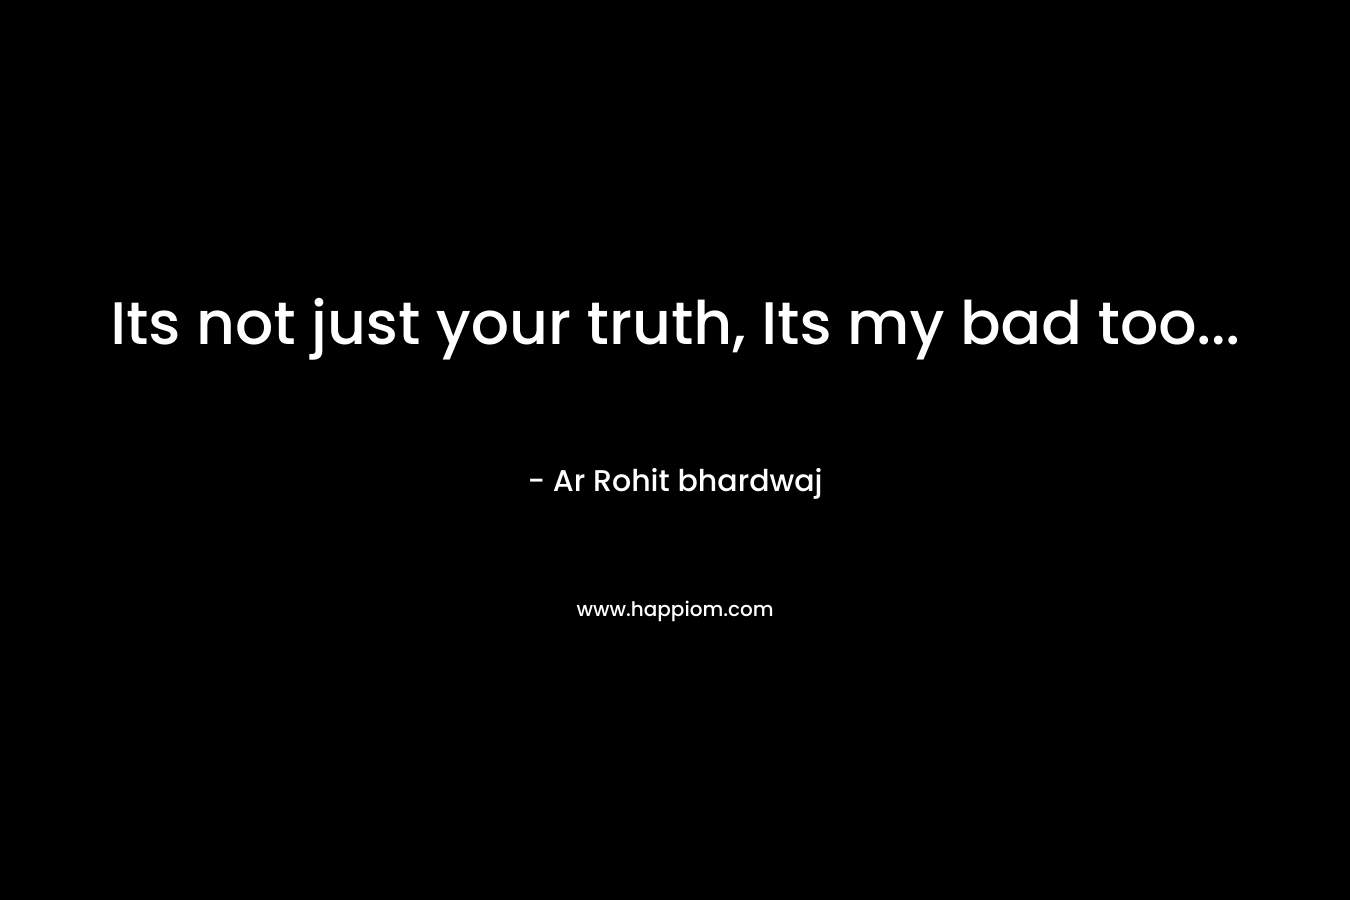 Its not just your truth, Its my bad too...